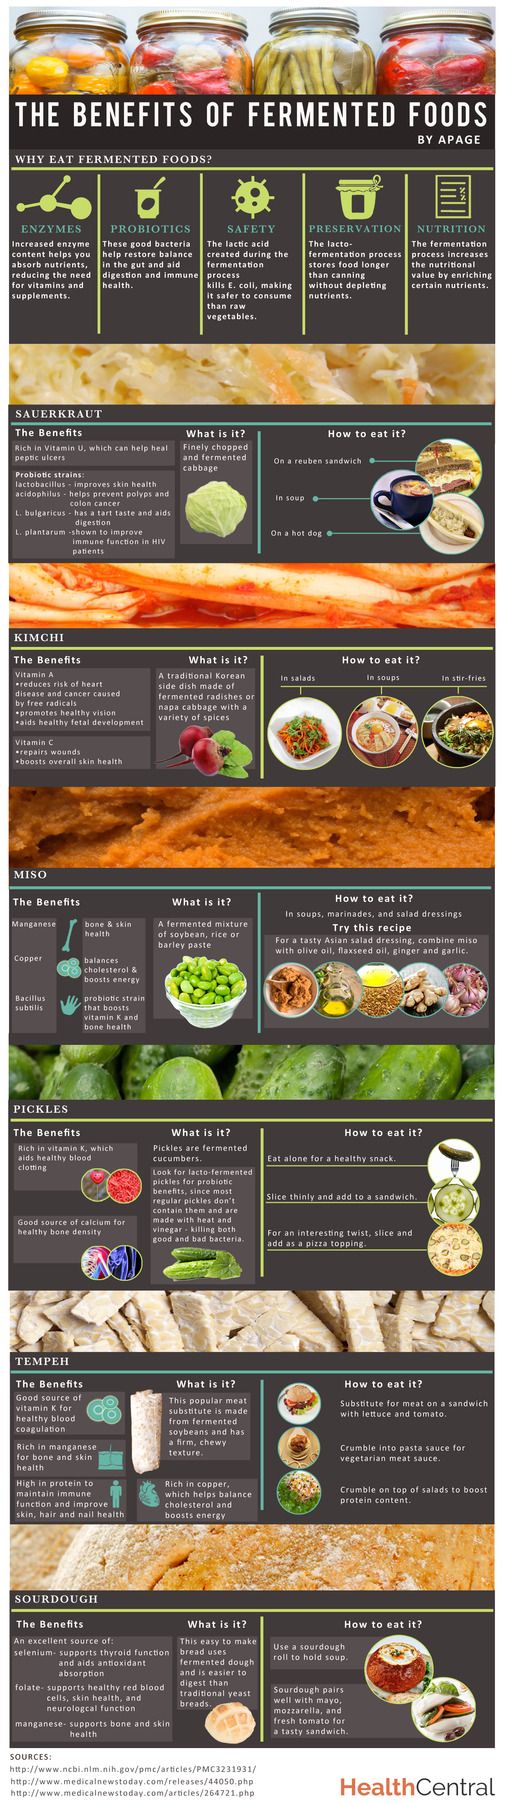 The Benefits of Fermented Foods (INFOGRAPHIC) - Diet & Exercise